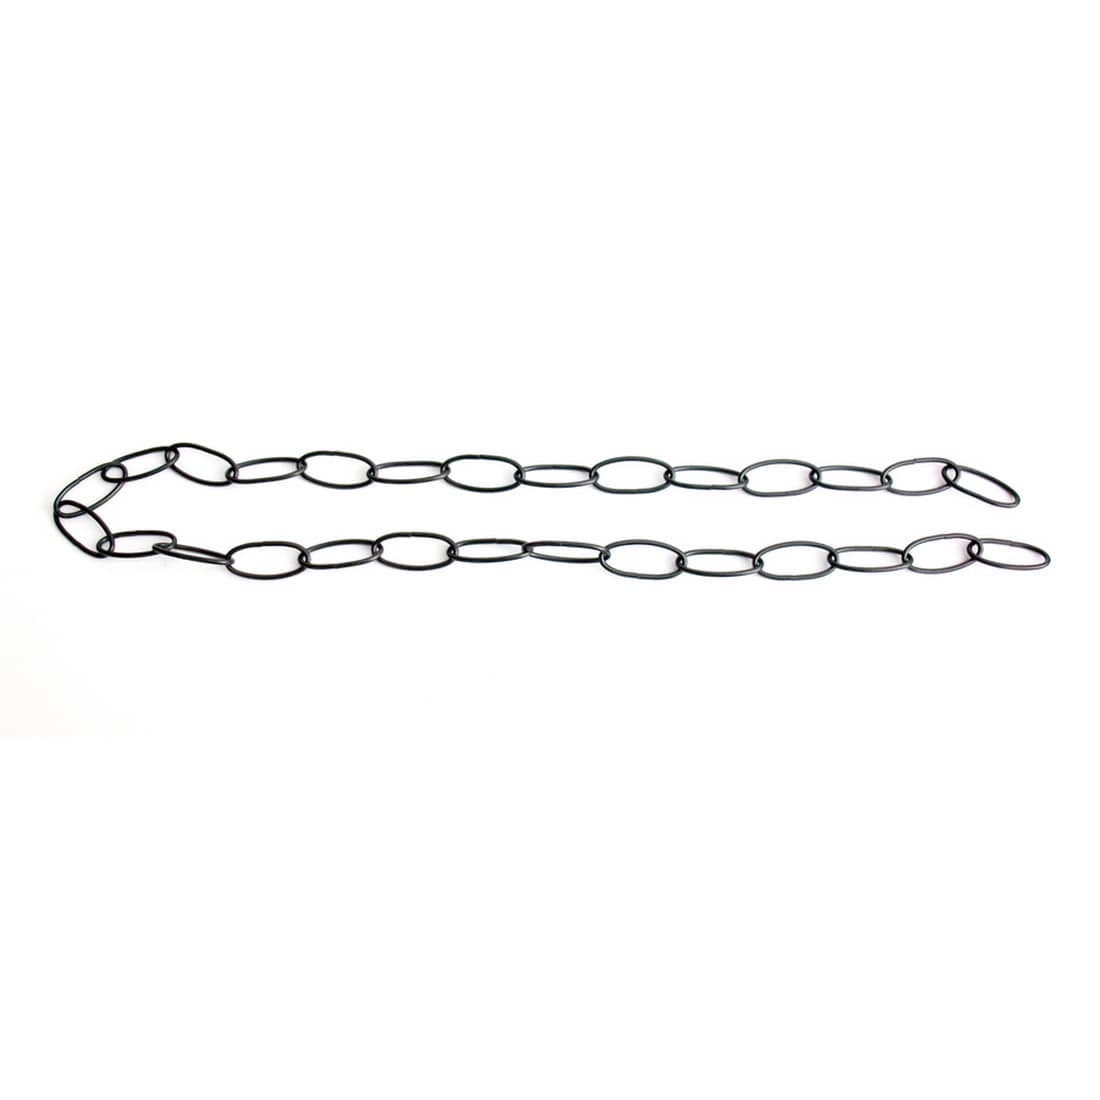 Chain Extension for Hanging Baskets, Planters, Oil Rubbed Bronze, 36 Inches  Long, Strong Hold, 1 Chain - Kroger